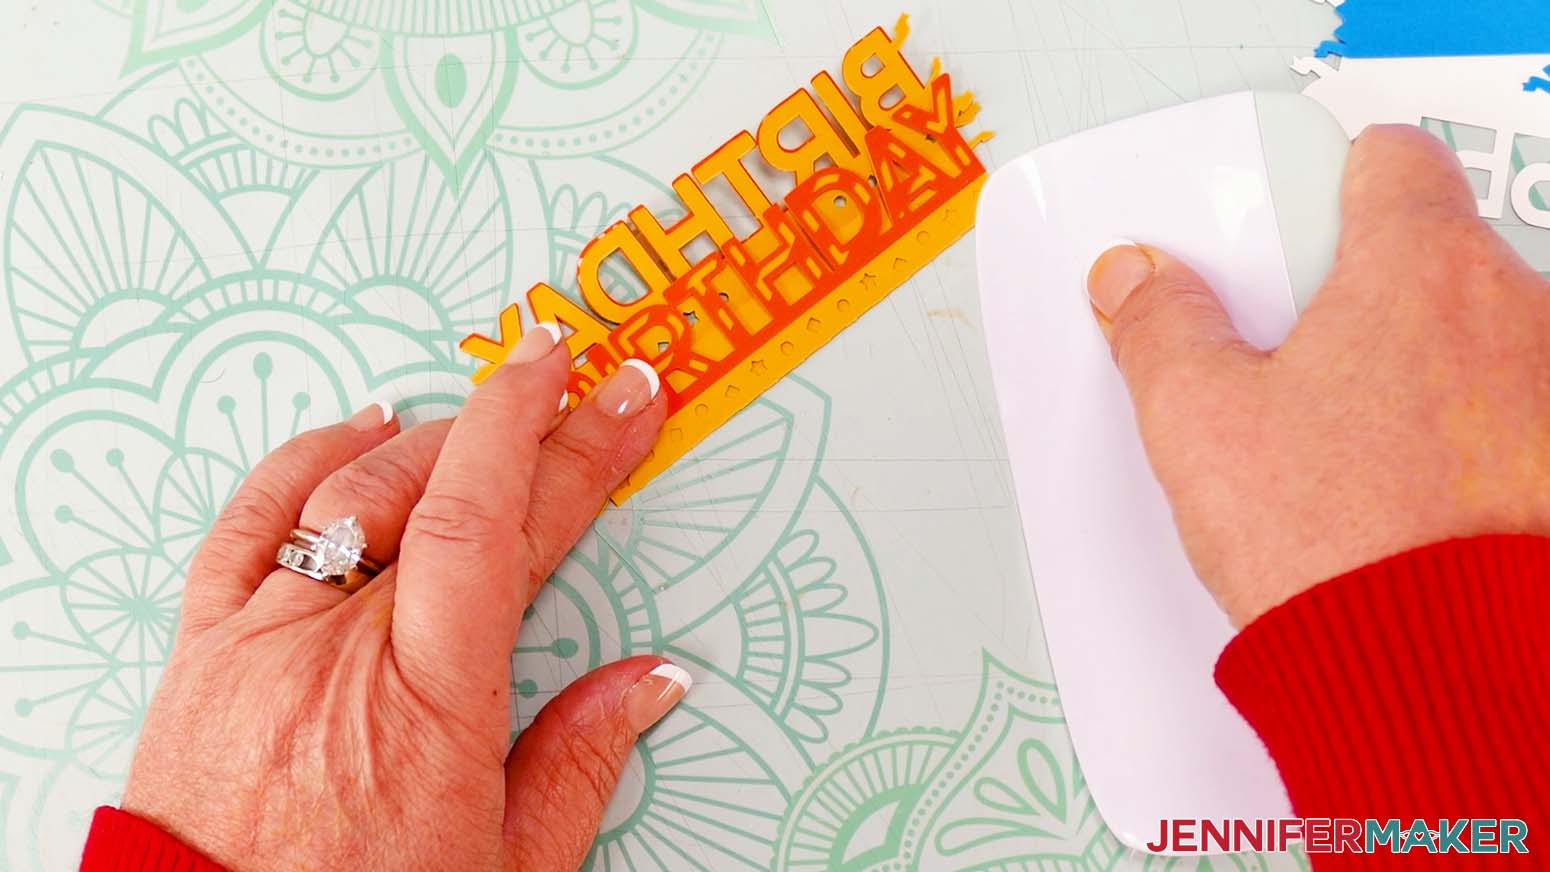 Use a scraper tool to crease along the folded edge of the cardboard jumping box "birthday" sentiment